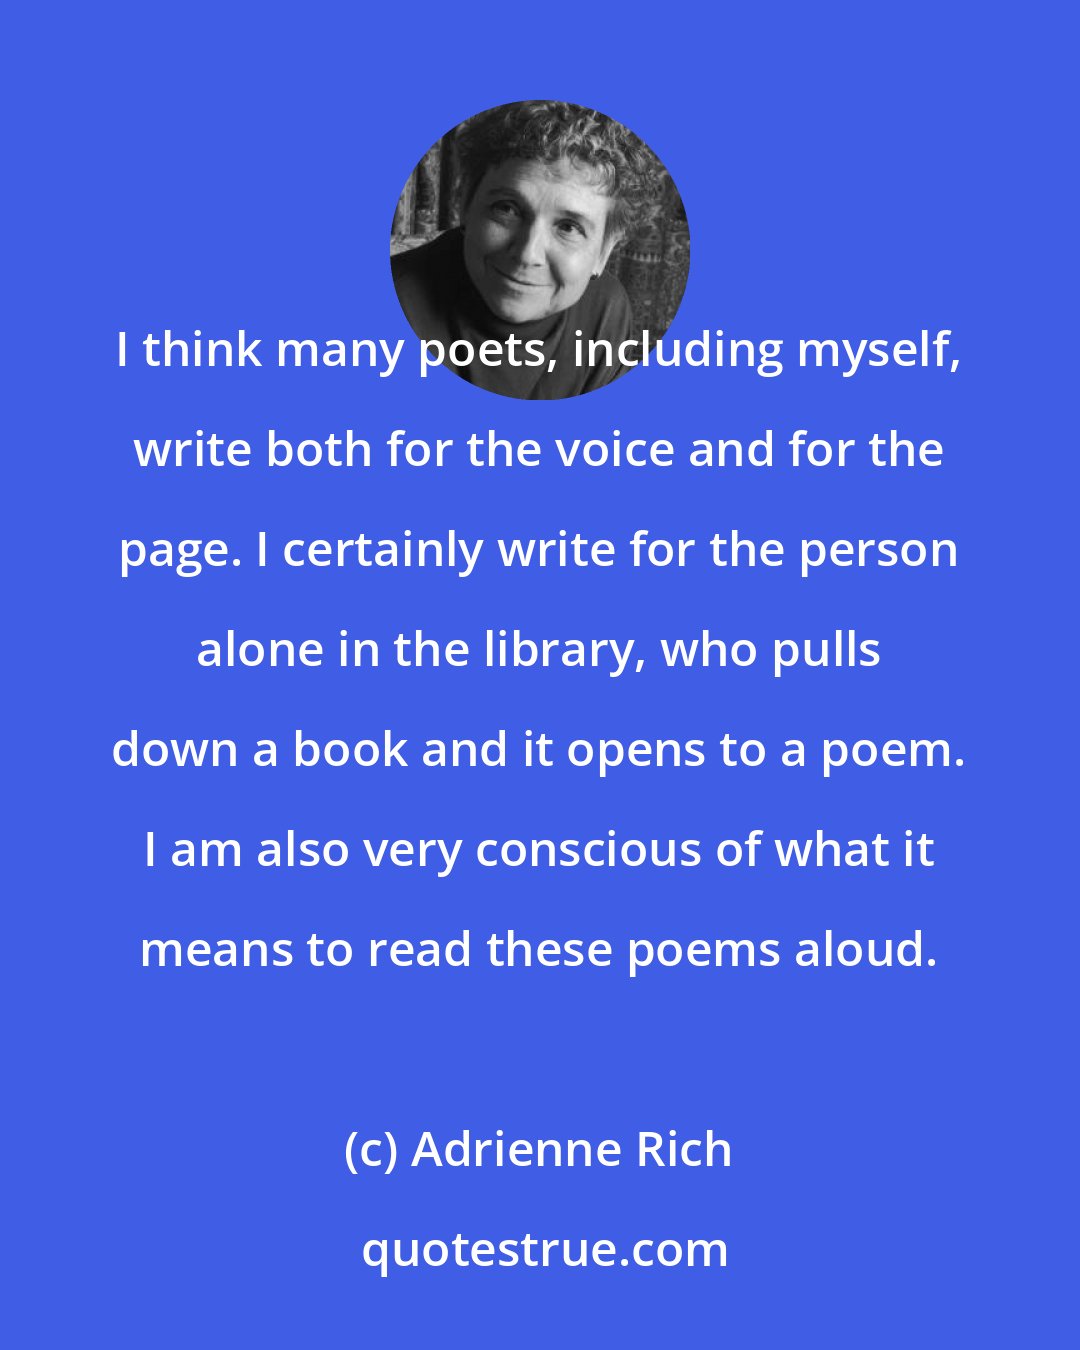 Adrienne Rich: I think many poets, including myself, write both for the voice and for the page. I certainly write for the person alone in the library, who pulls down a book and it opens to a poem. I am also very conscious of what it means to read these poems aloud.